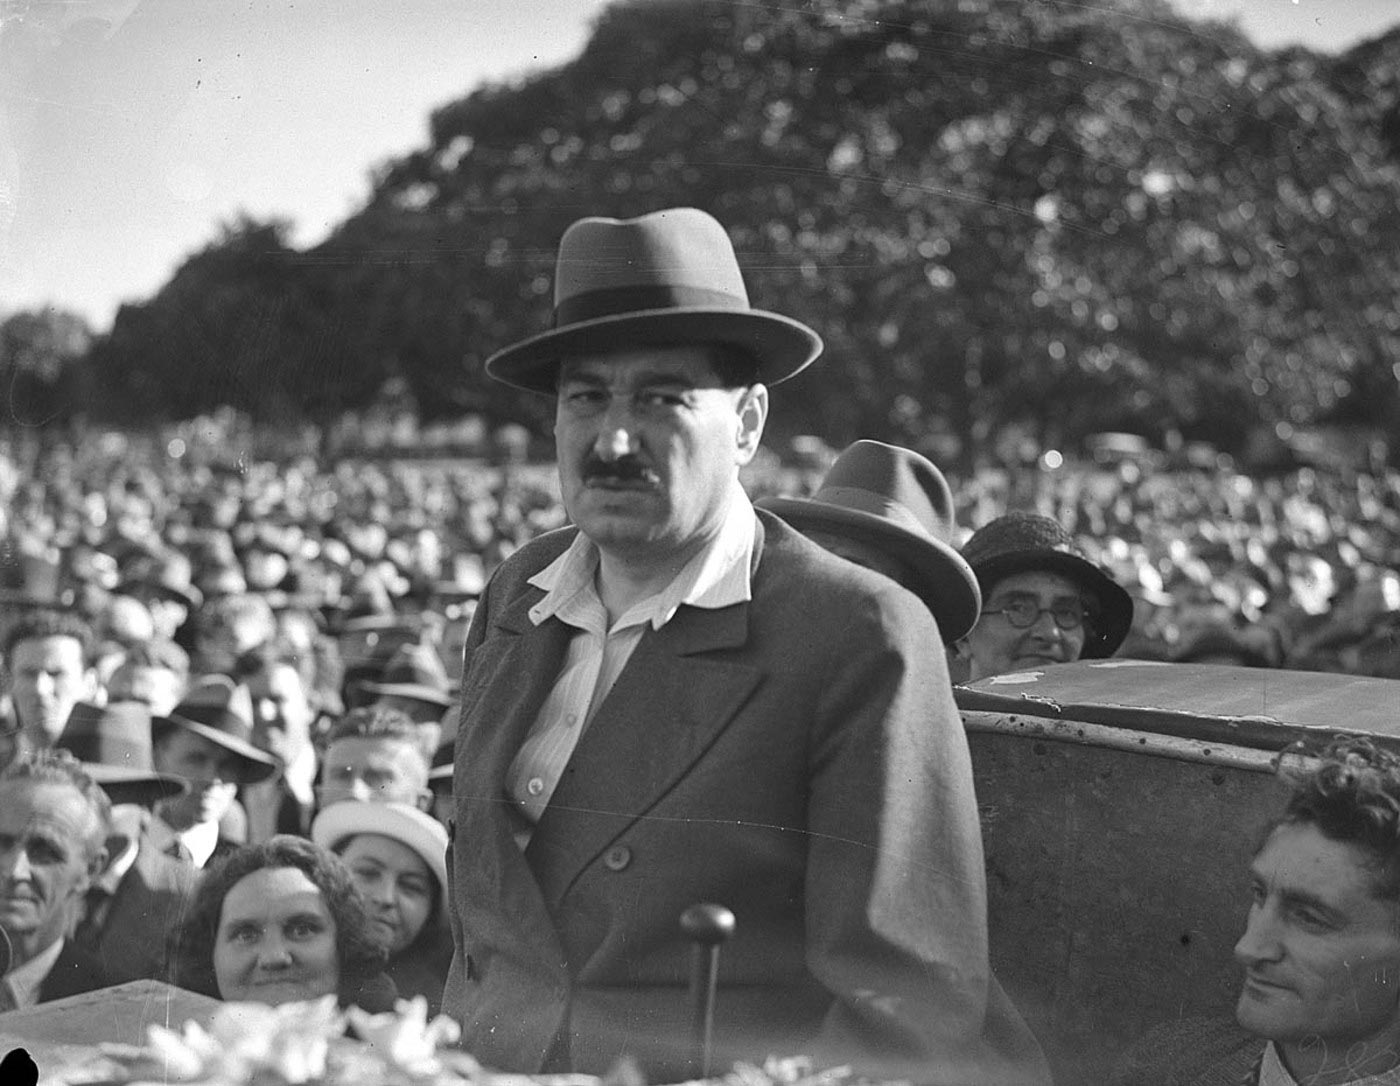 Communist International member Egon Kisch speaking at the Domain Sydney in 1934. Across 1934 and 1935, the Australian Government attempted to exclude Kisch, who was born in Prague, from Australia using the Immigration Restriction Act and dictation tests.